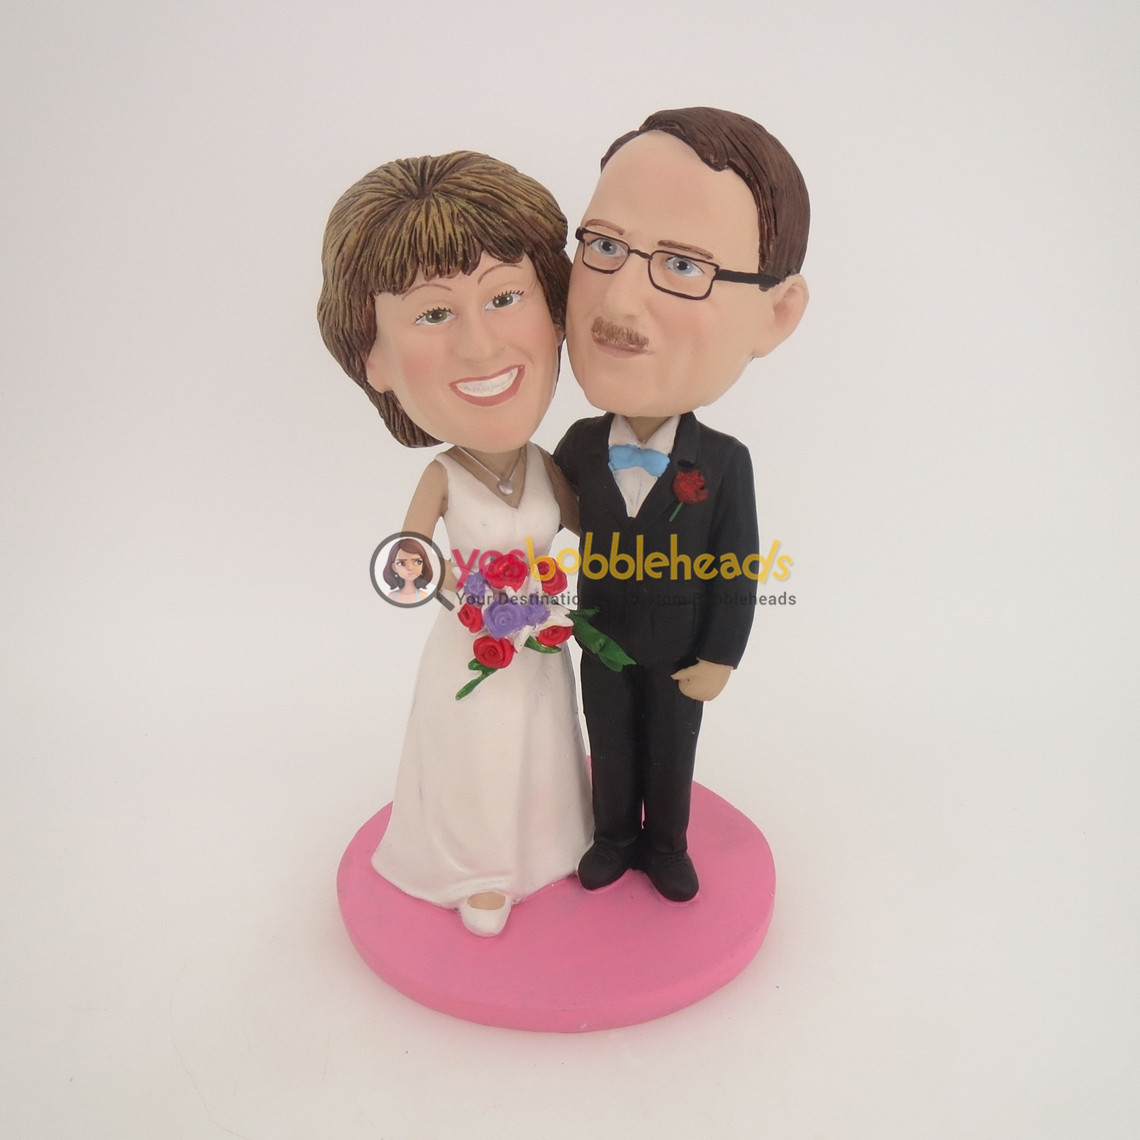 Picture of Custom Bobblehead Doll: Black Suit And White Wedding Dress Arm Behind Each Other Wedding Couple